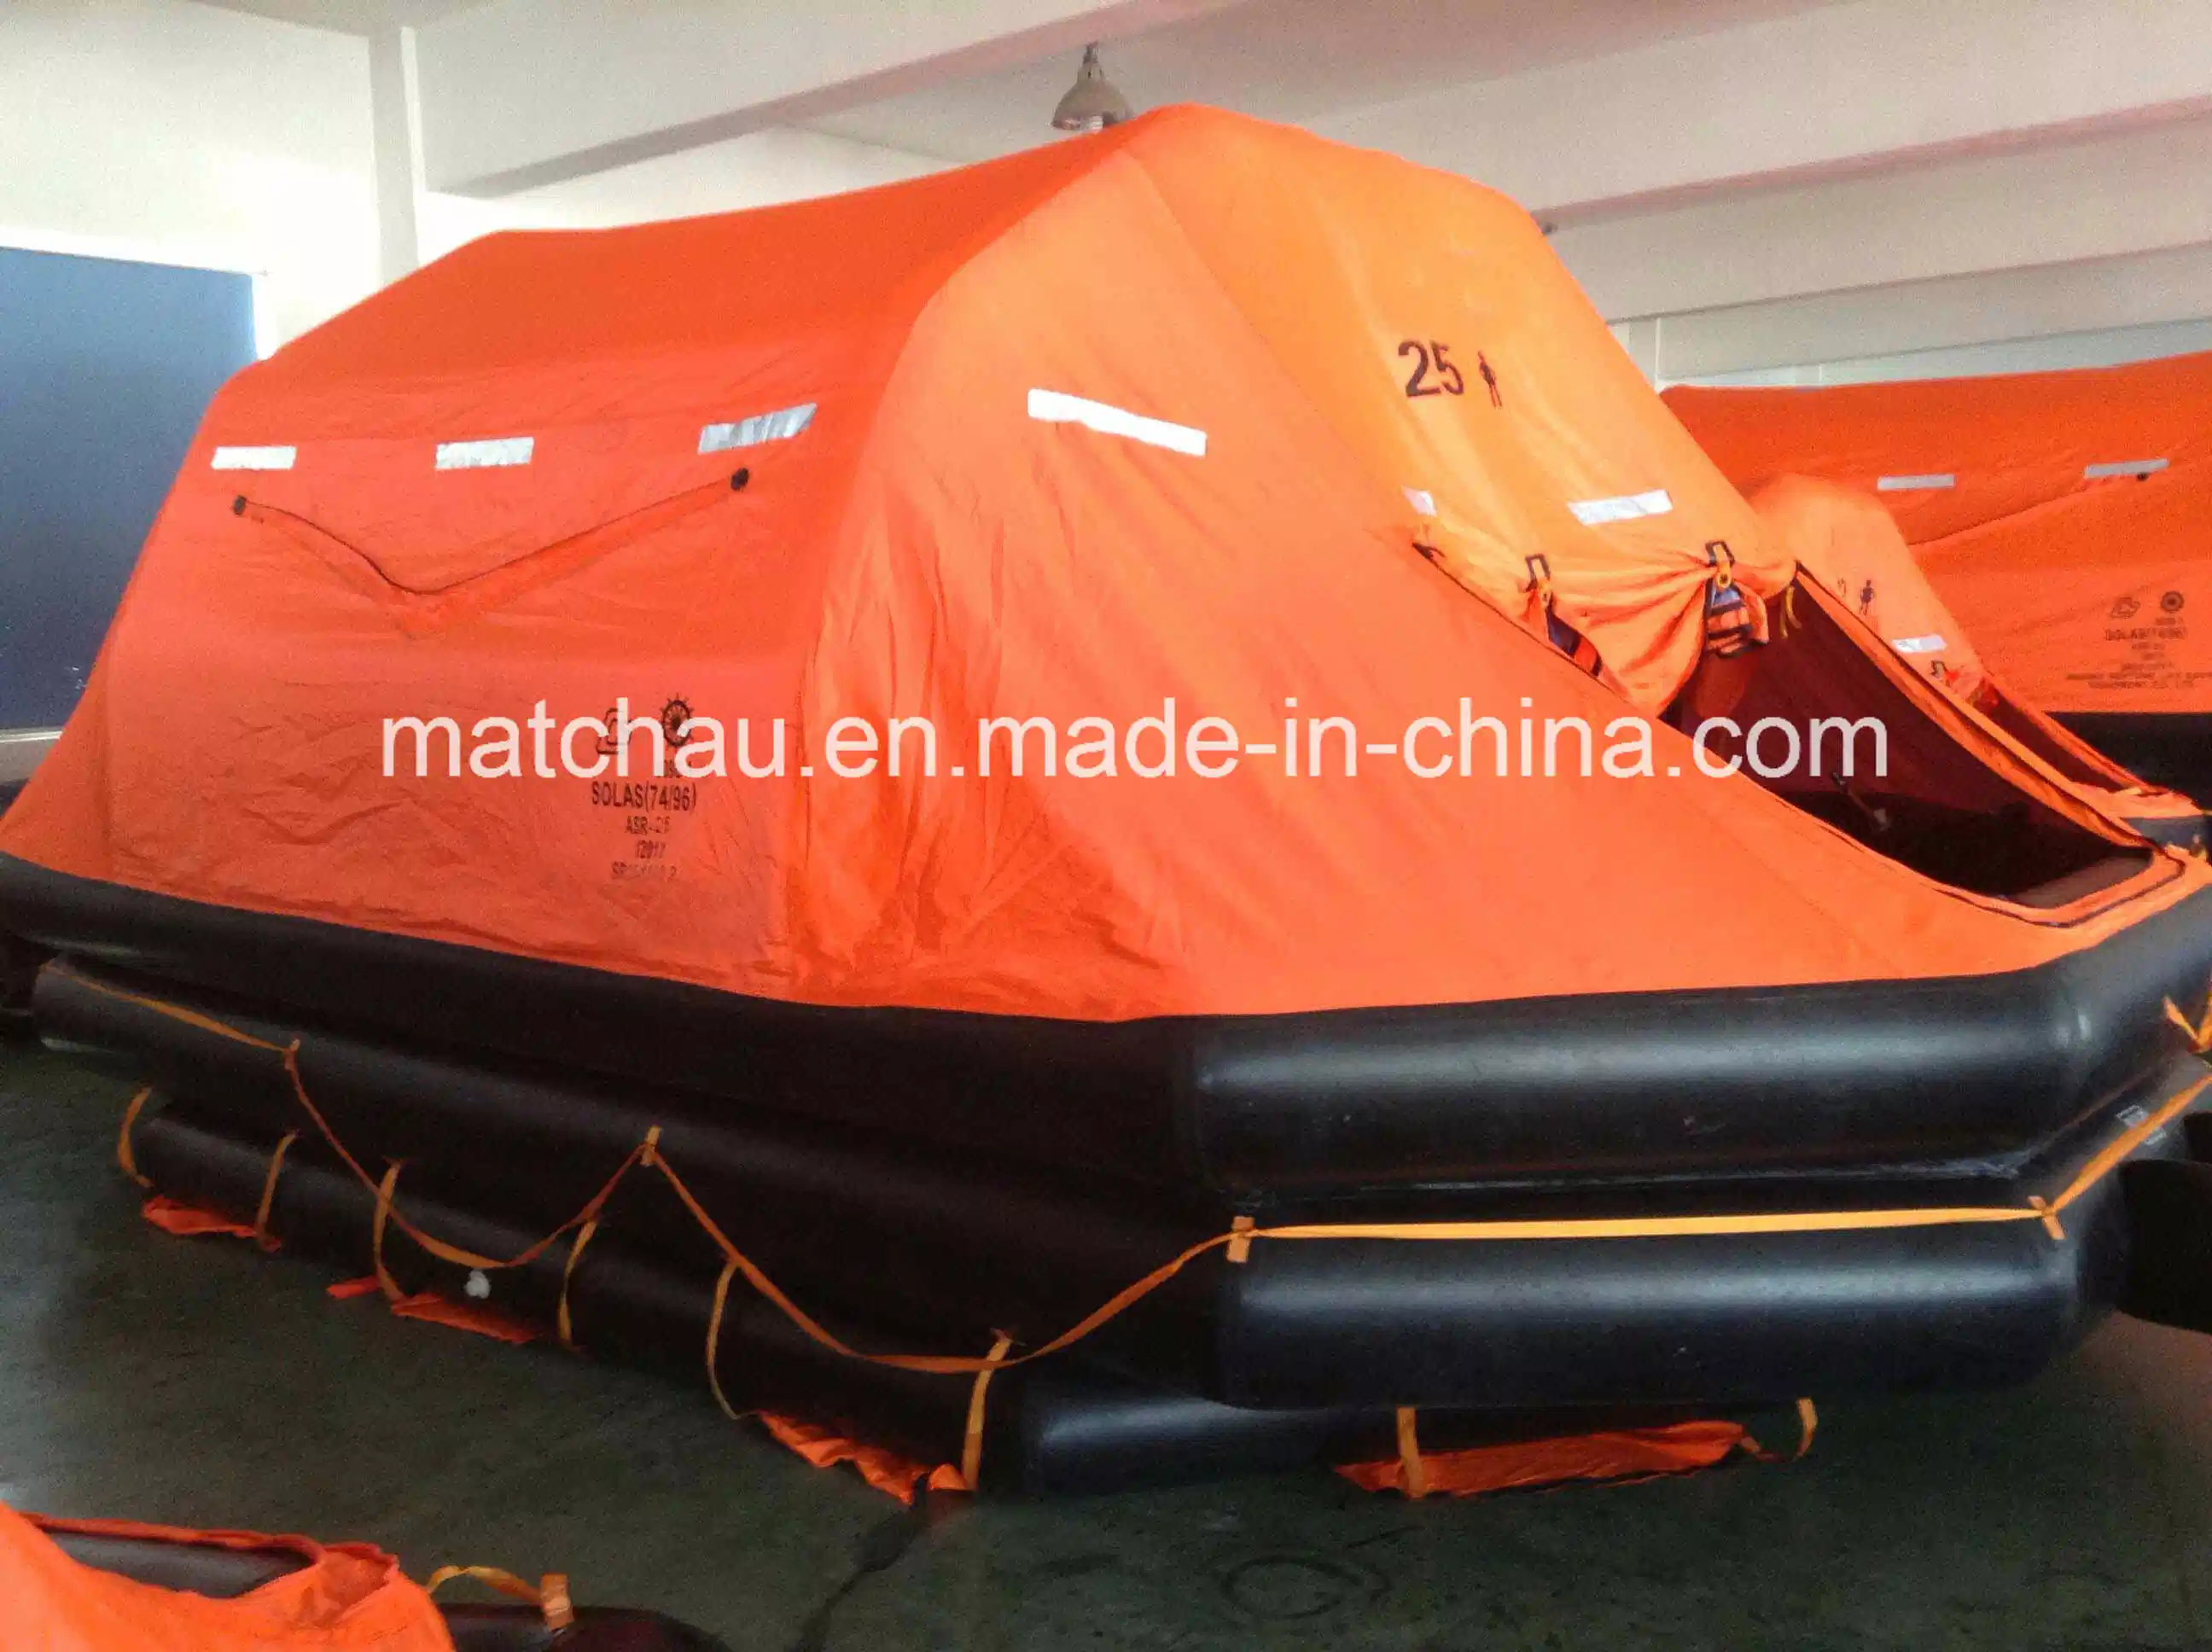 Yacht Inflatable Boat Life Raft with Ec Certificate